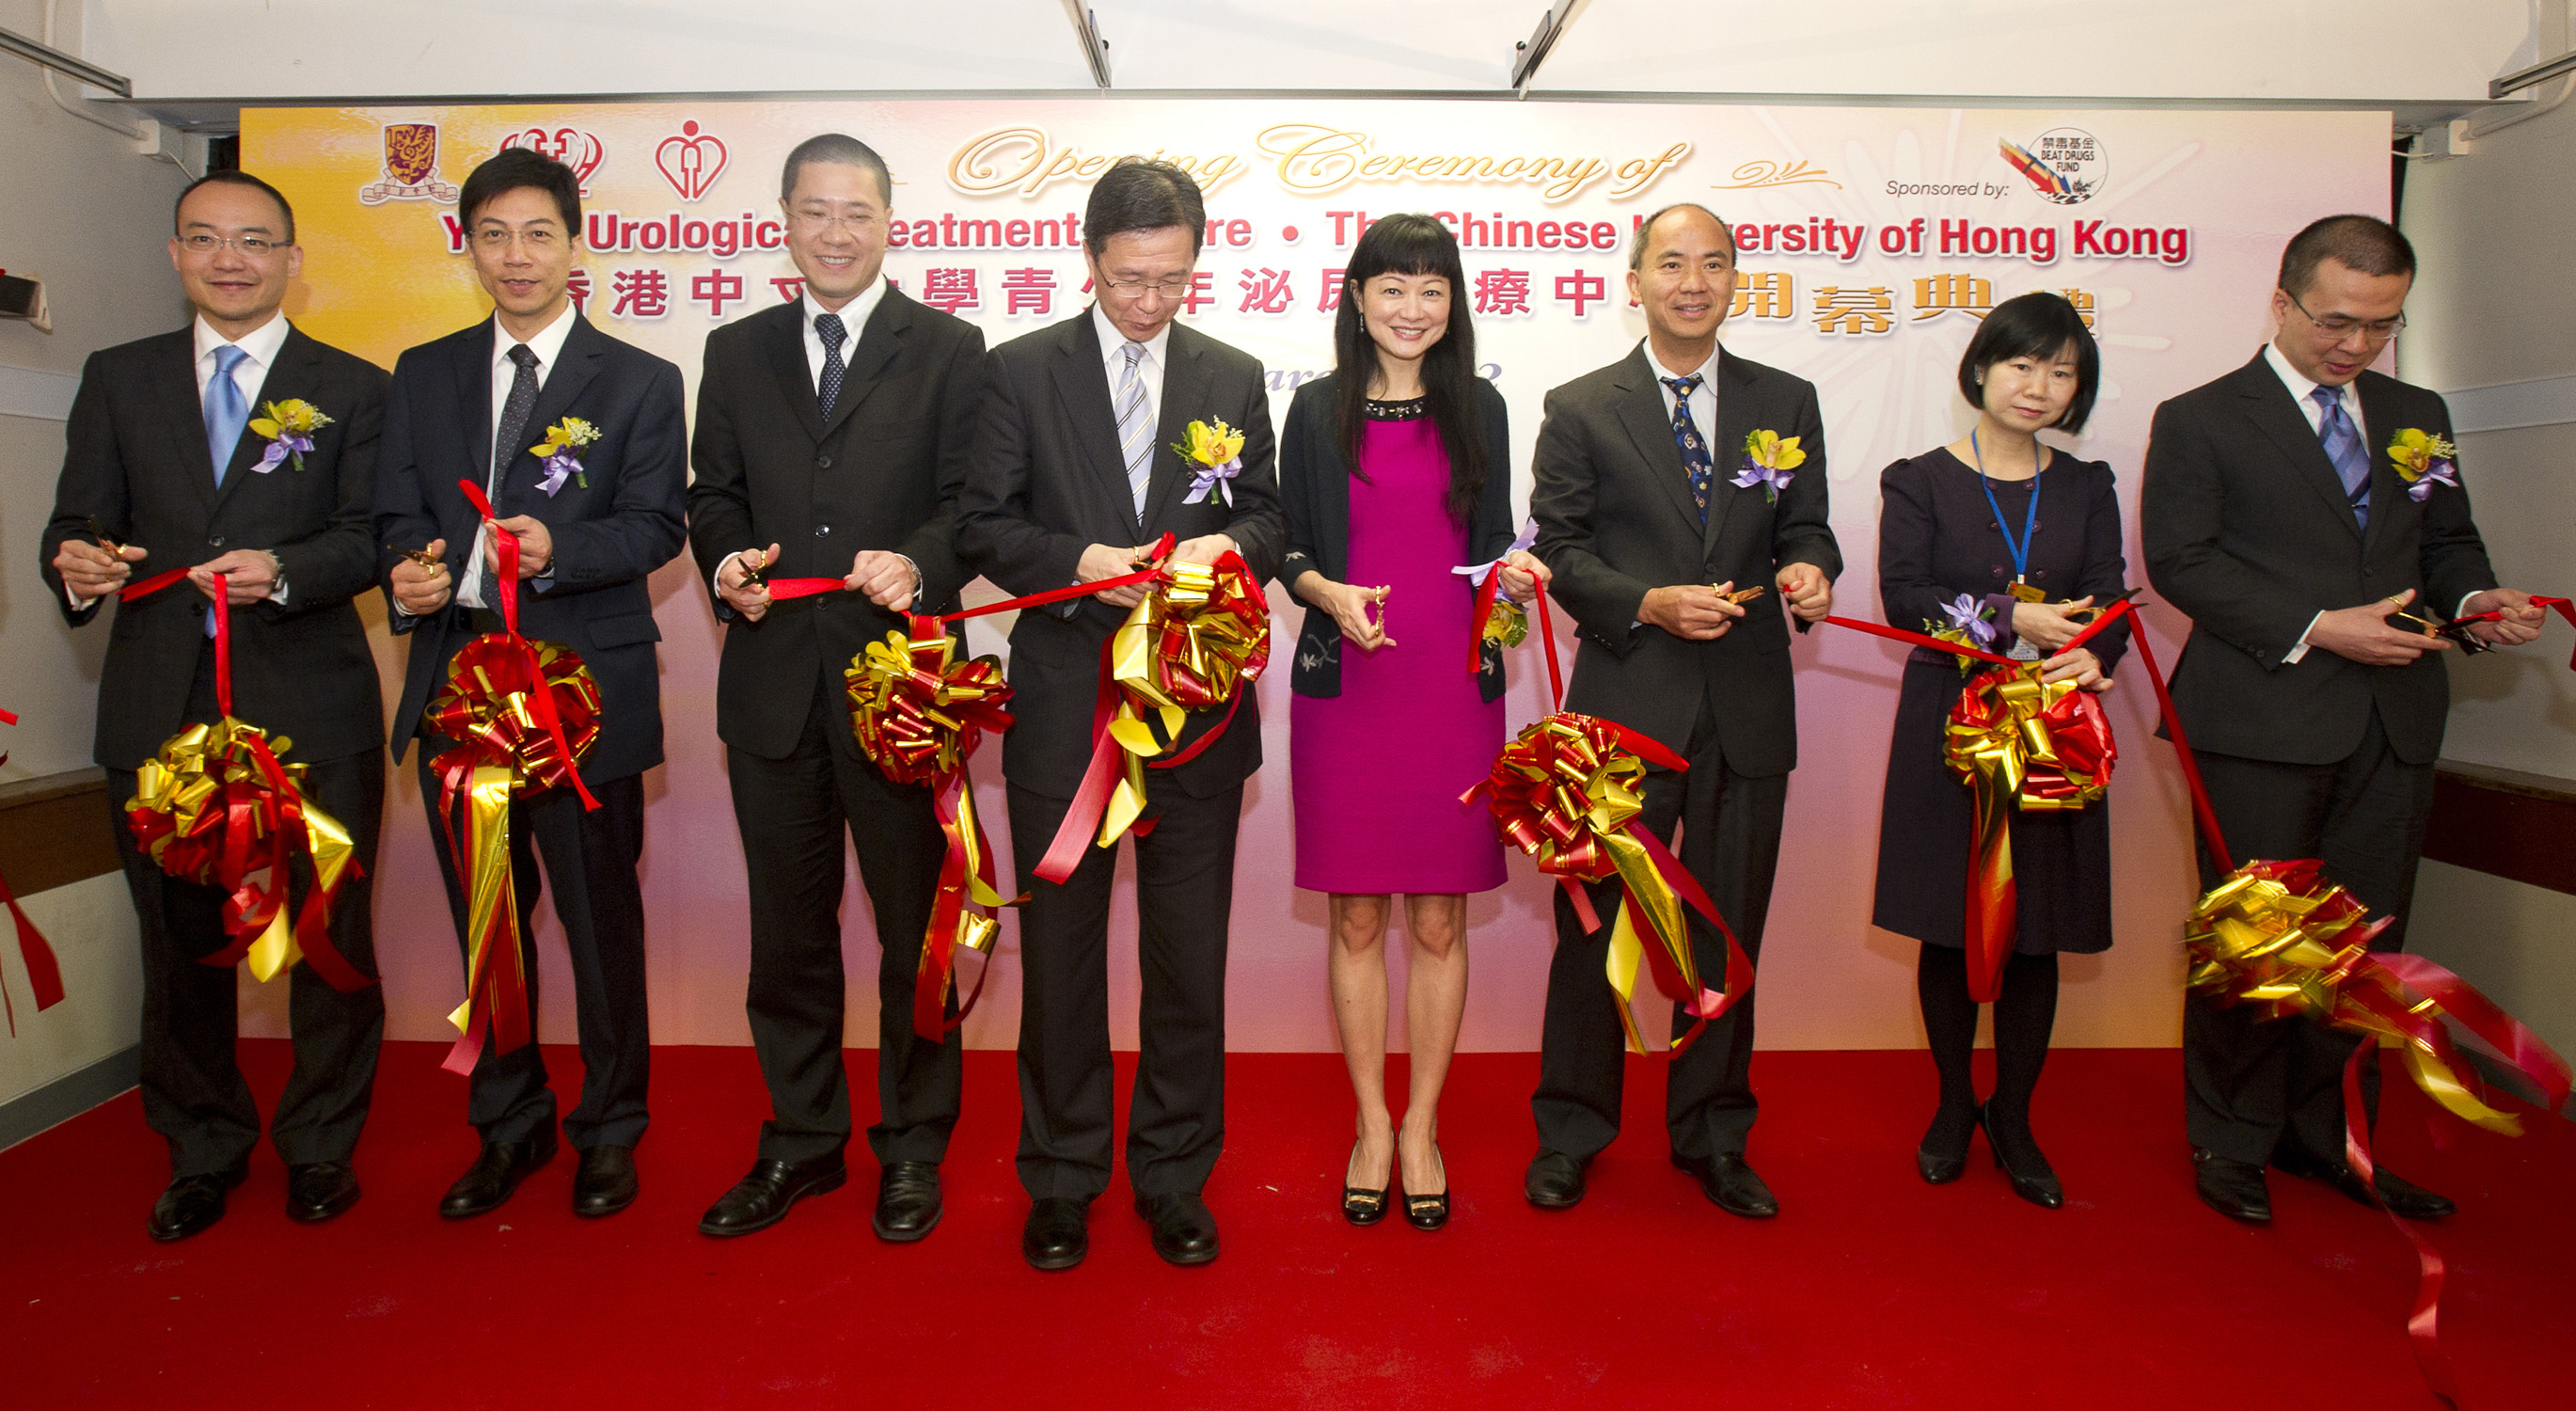 (from left) Dr. TAM Yuk-him, Consultant, Division of Paediatric Surgery and Paediatric Urology, Department of Surgery, Prince of Wales Hospital; Dr. LAU Mun-cheung Herman, Hospital Chief Executive, Cheshire Home; Prof. LAI Bo-san Paul, Chairman, Department of Surgery, CUHK; Dr. FUNG Hong, JP, Cluster Chief Executive, New Territories East Cluster, Hospital Authority; Ms. PONG Oi-lan Scarlett, JP, Chairman, Preventive Education & Publicity Sub-committee, Action Committee Against Narcotics, HKSAR Government; Dr. MAN Chi-yin, Hospital Chief Executive, North District Hospital; Ms. HO Pui-yee Becky, Deputizing Cluster General Manager (Nursing), New Territories East Cluster, Hospital Authority and Prof. NG Chi-fai Anthony, Professor, Division of Urology, Department of Surgery, CUHK officiate at the ribbon-cutting ceremony of CUHK's Youth Urological Treatment Centre, marking the opening of the territory's first centre to provide urological assessment and treatment to young drug abusers